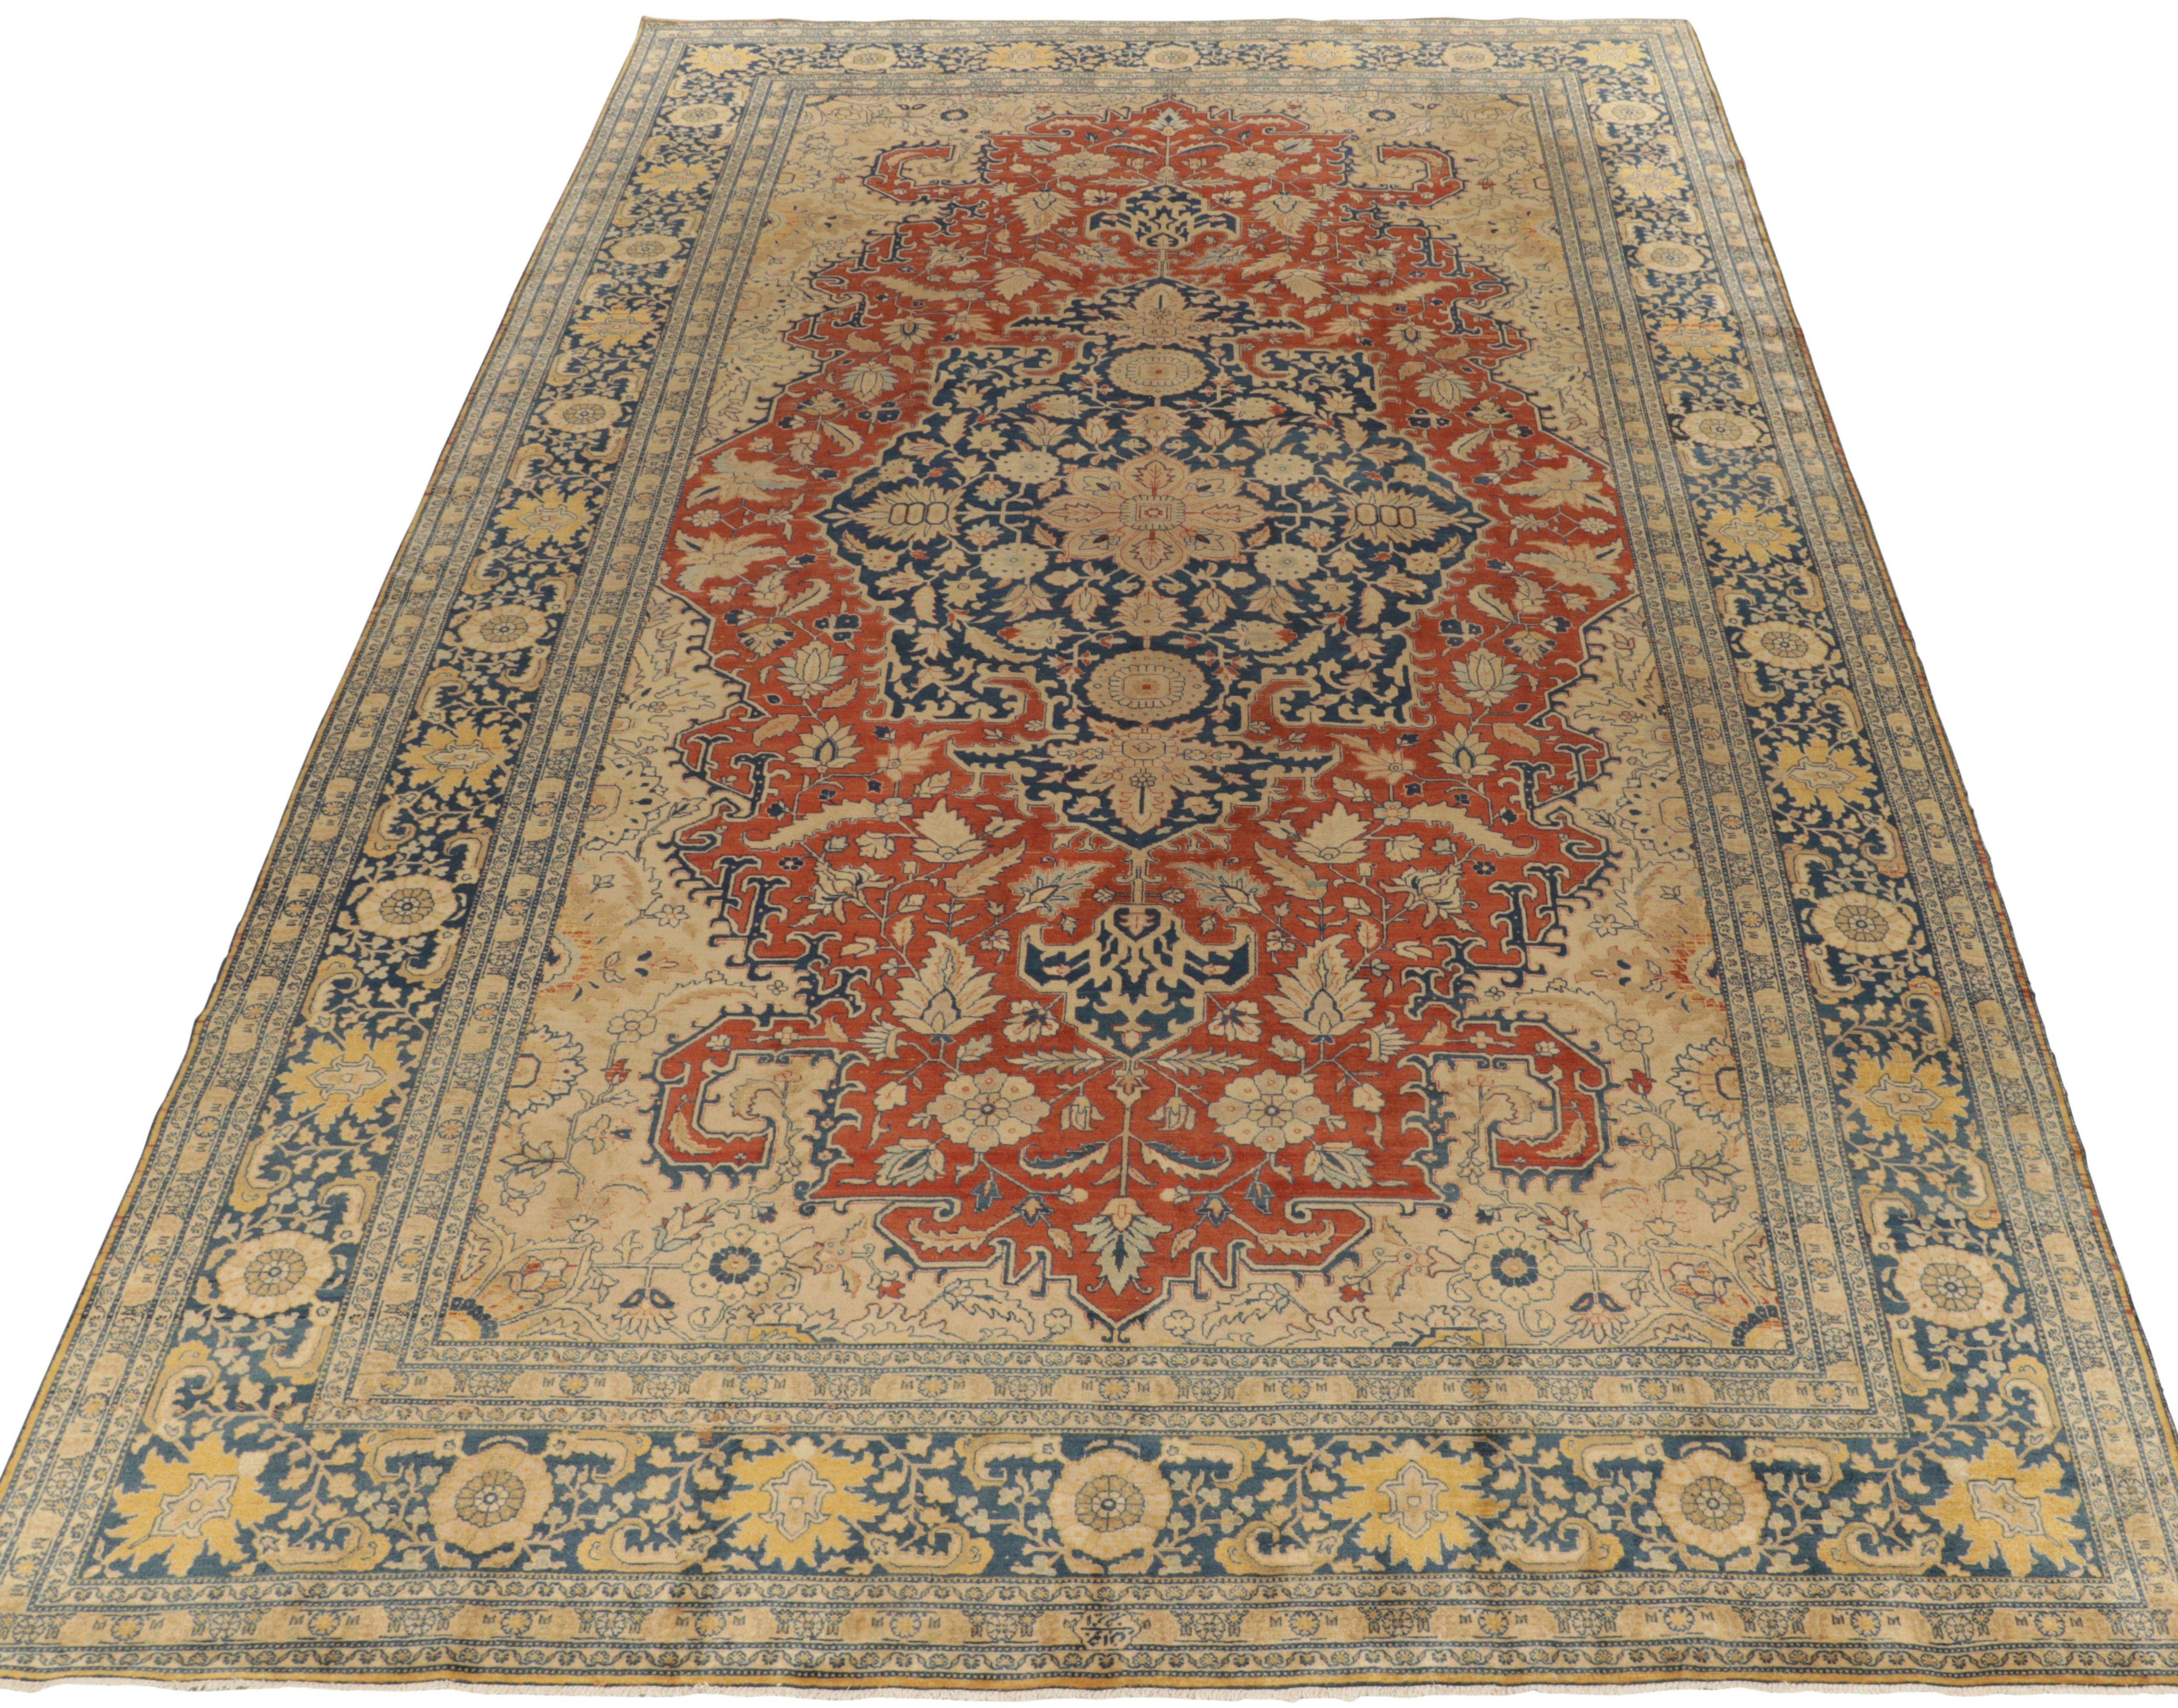 Celebrating the fine lineage of Persian rugs, Rug & Kilim welcomes this 11x17 Tabriz rug of the 1920s to its reputed Antique & Vintage collection. The classic piece exemplifies the traditional medallion style with remarkable florals & palmettes in